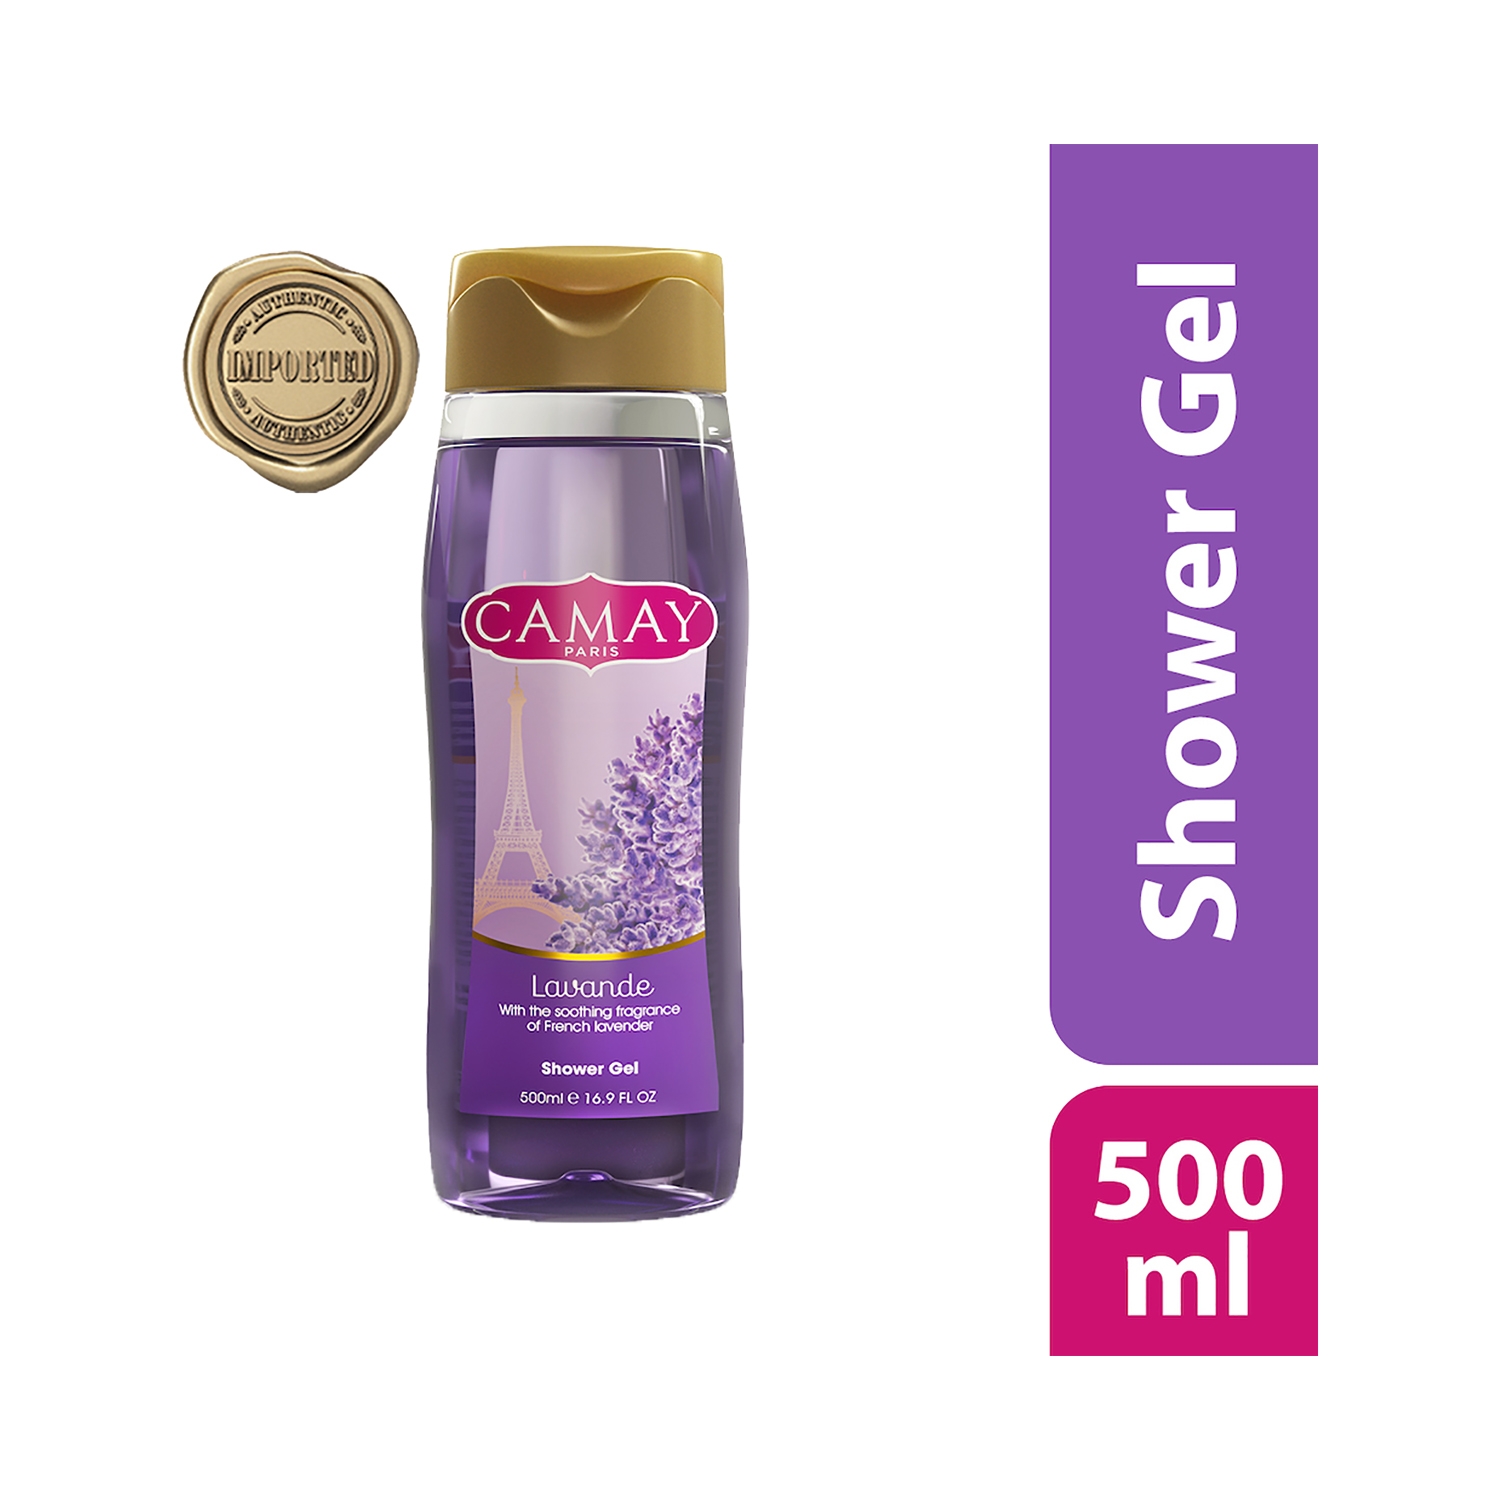 Camay | Camay Paris Lavender Shower Gel with Natural Oils (500ml)